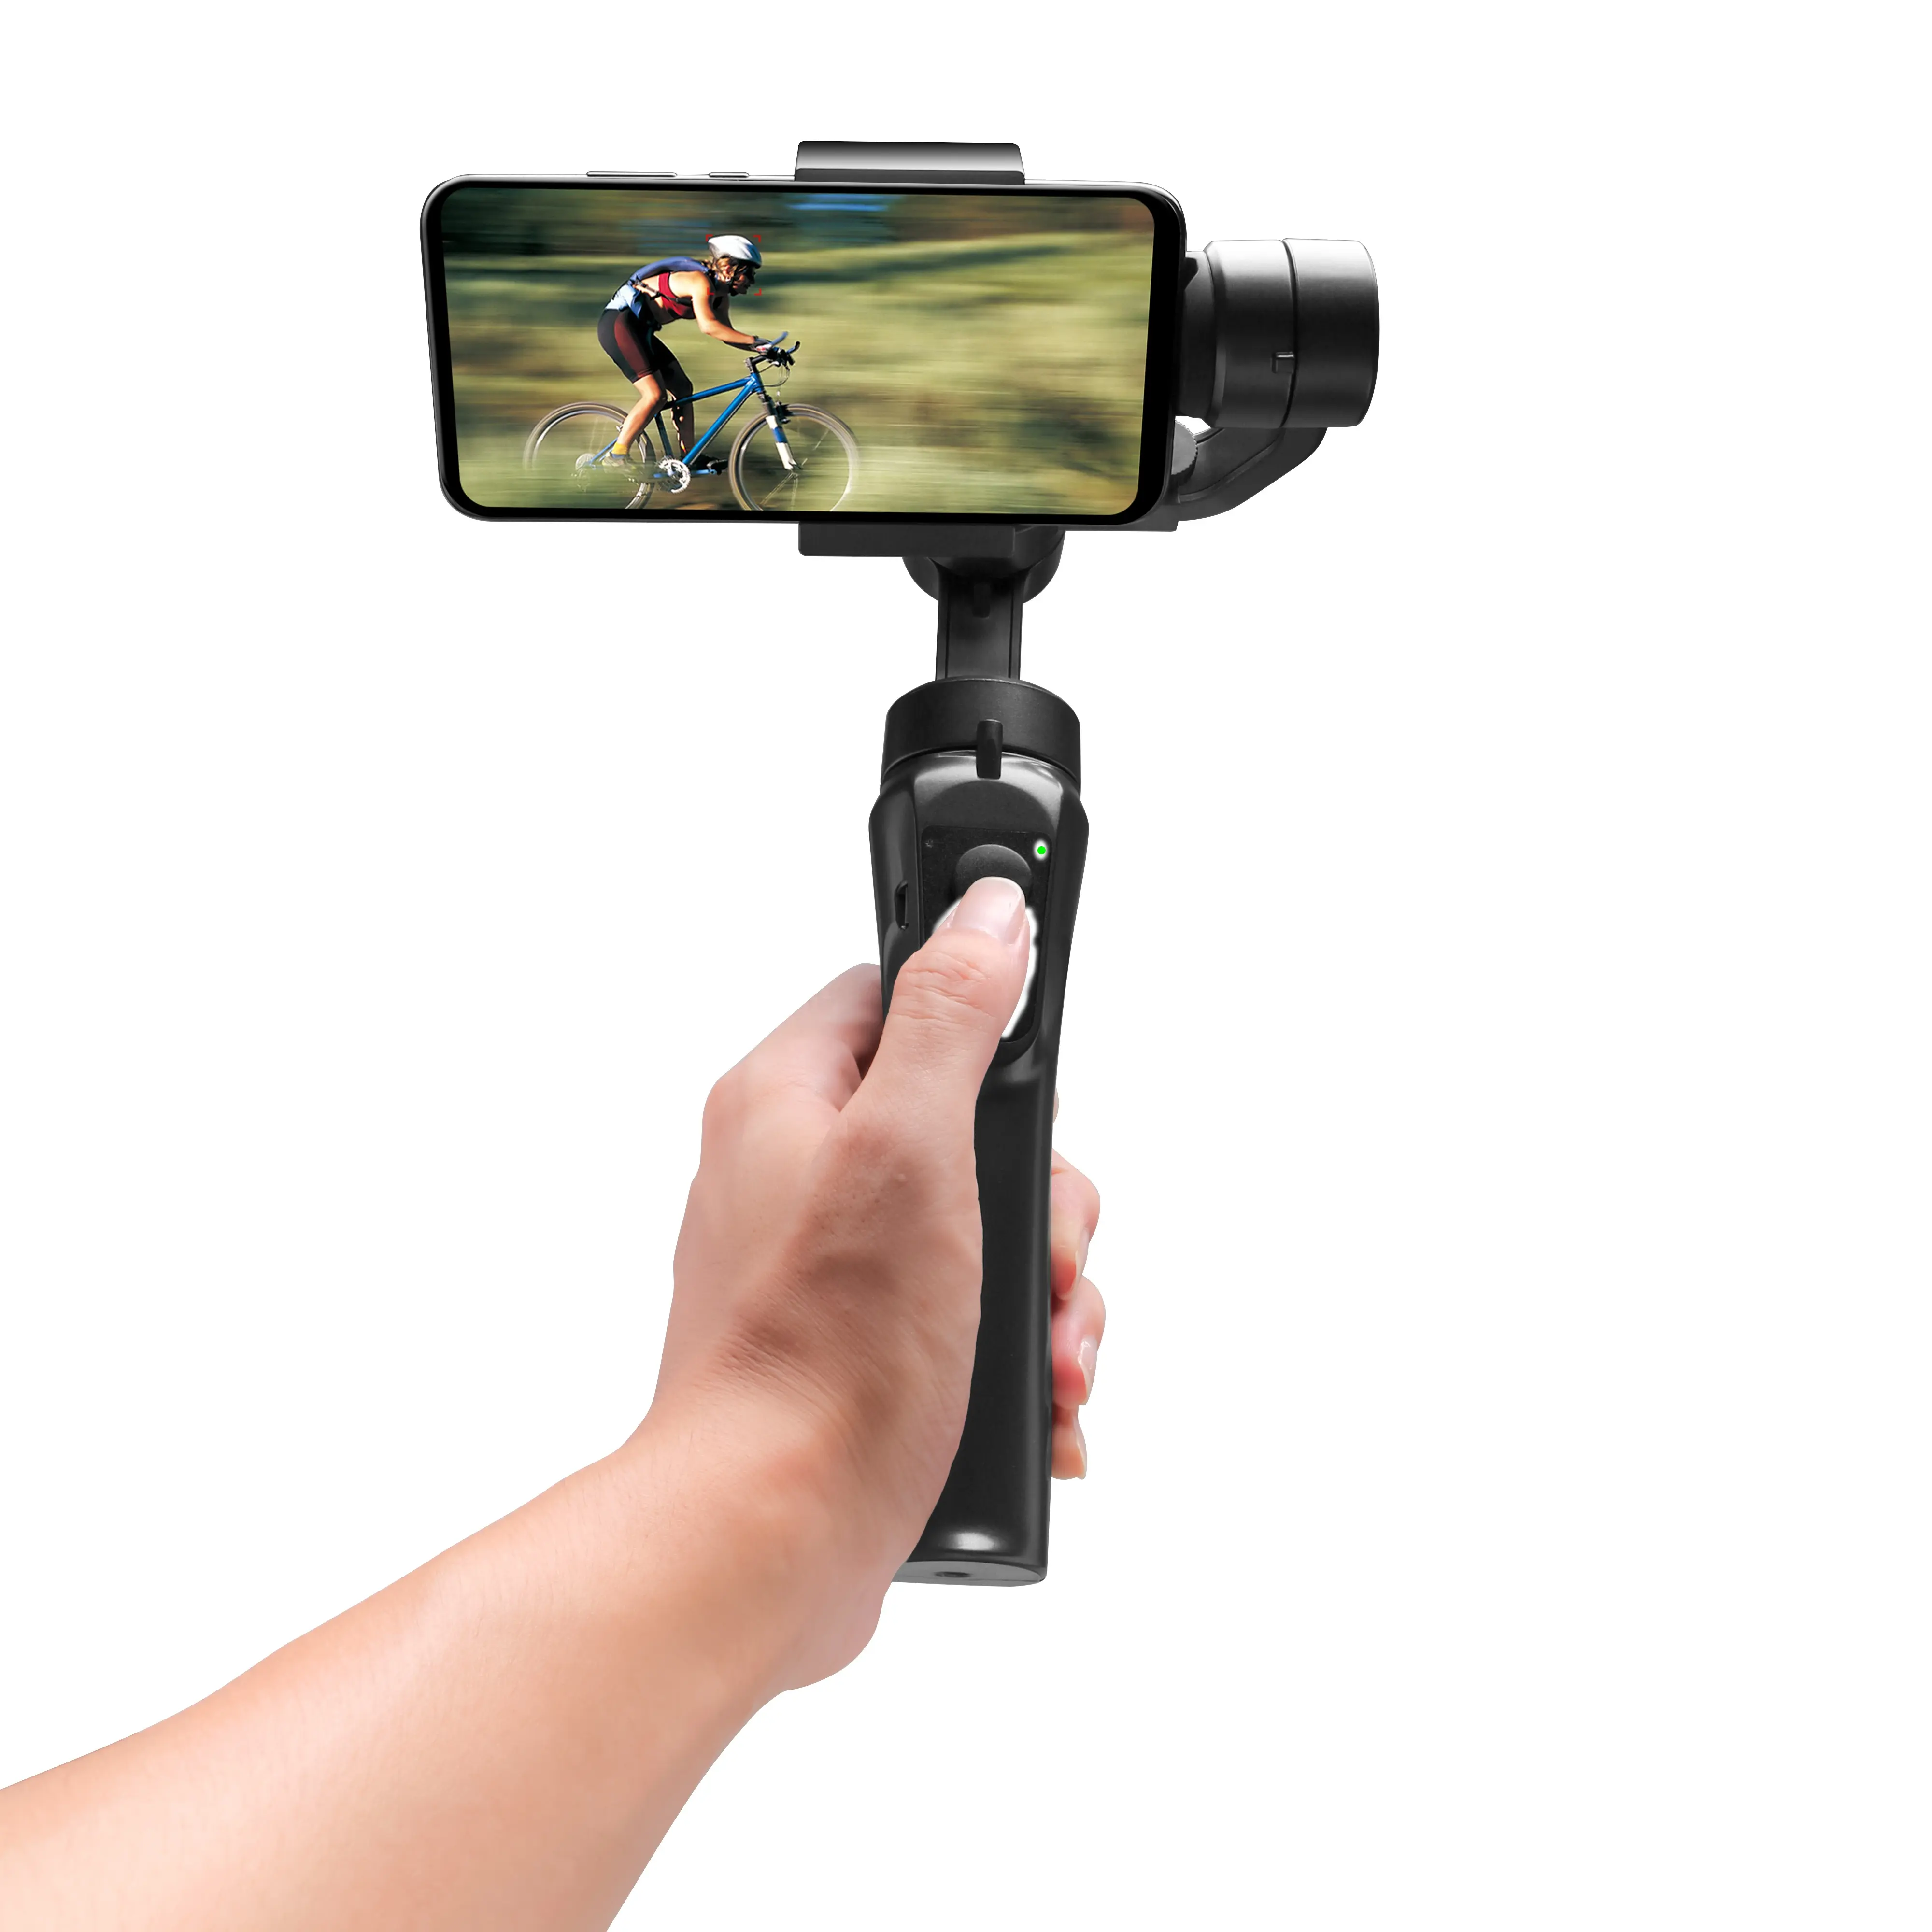 Amazon sell well CYKE H4 gimbal 3 axis cell phone Control the focal length Professional stabilizer Face tracking VLOG Selfie F6